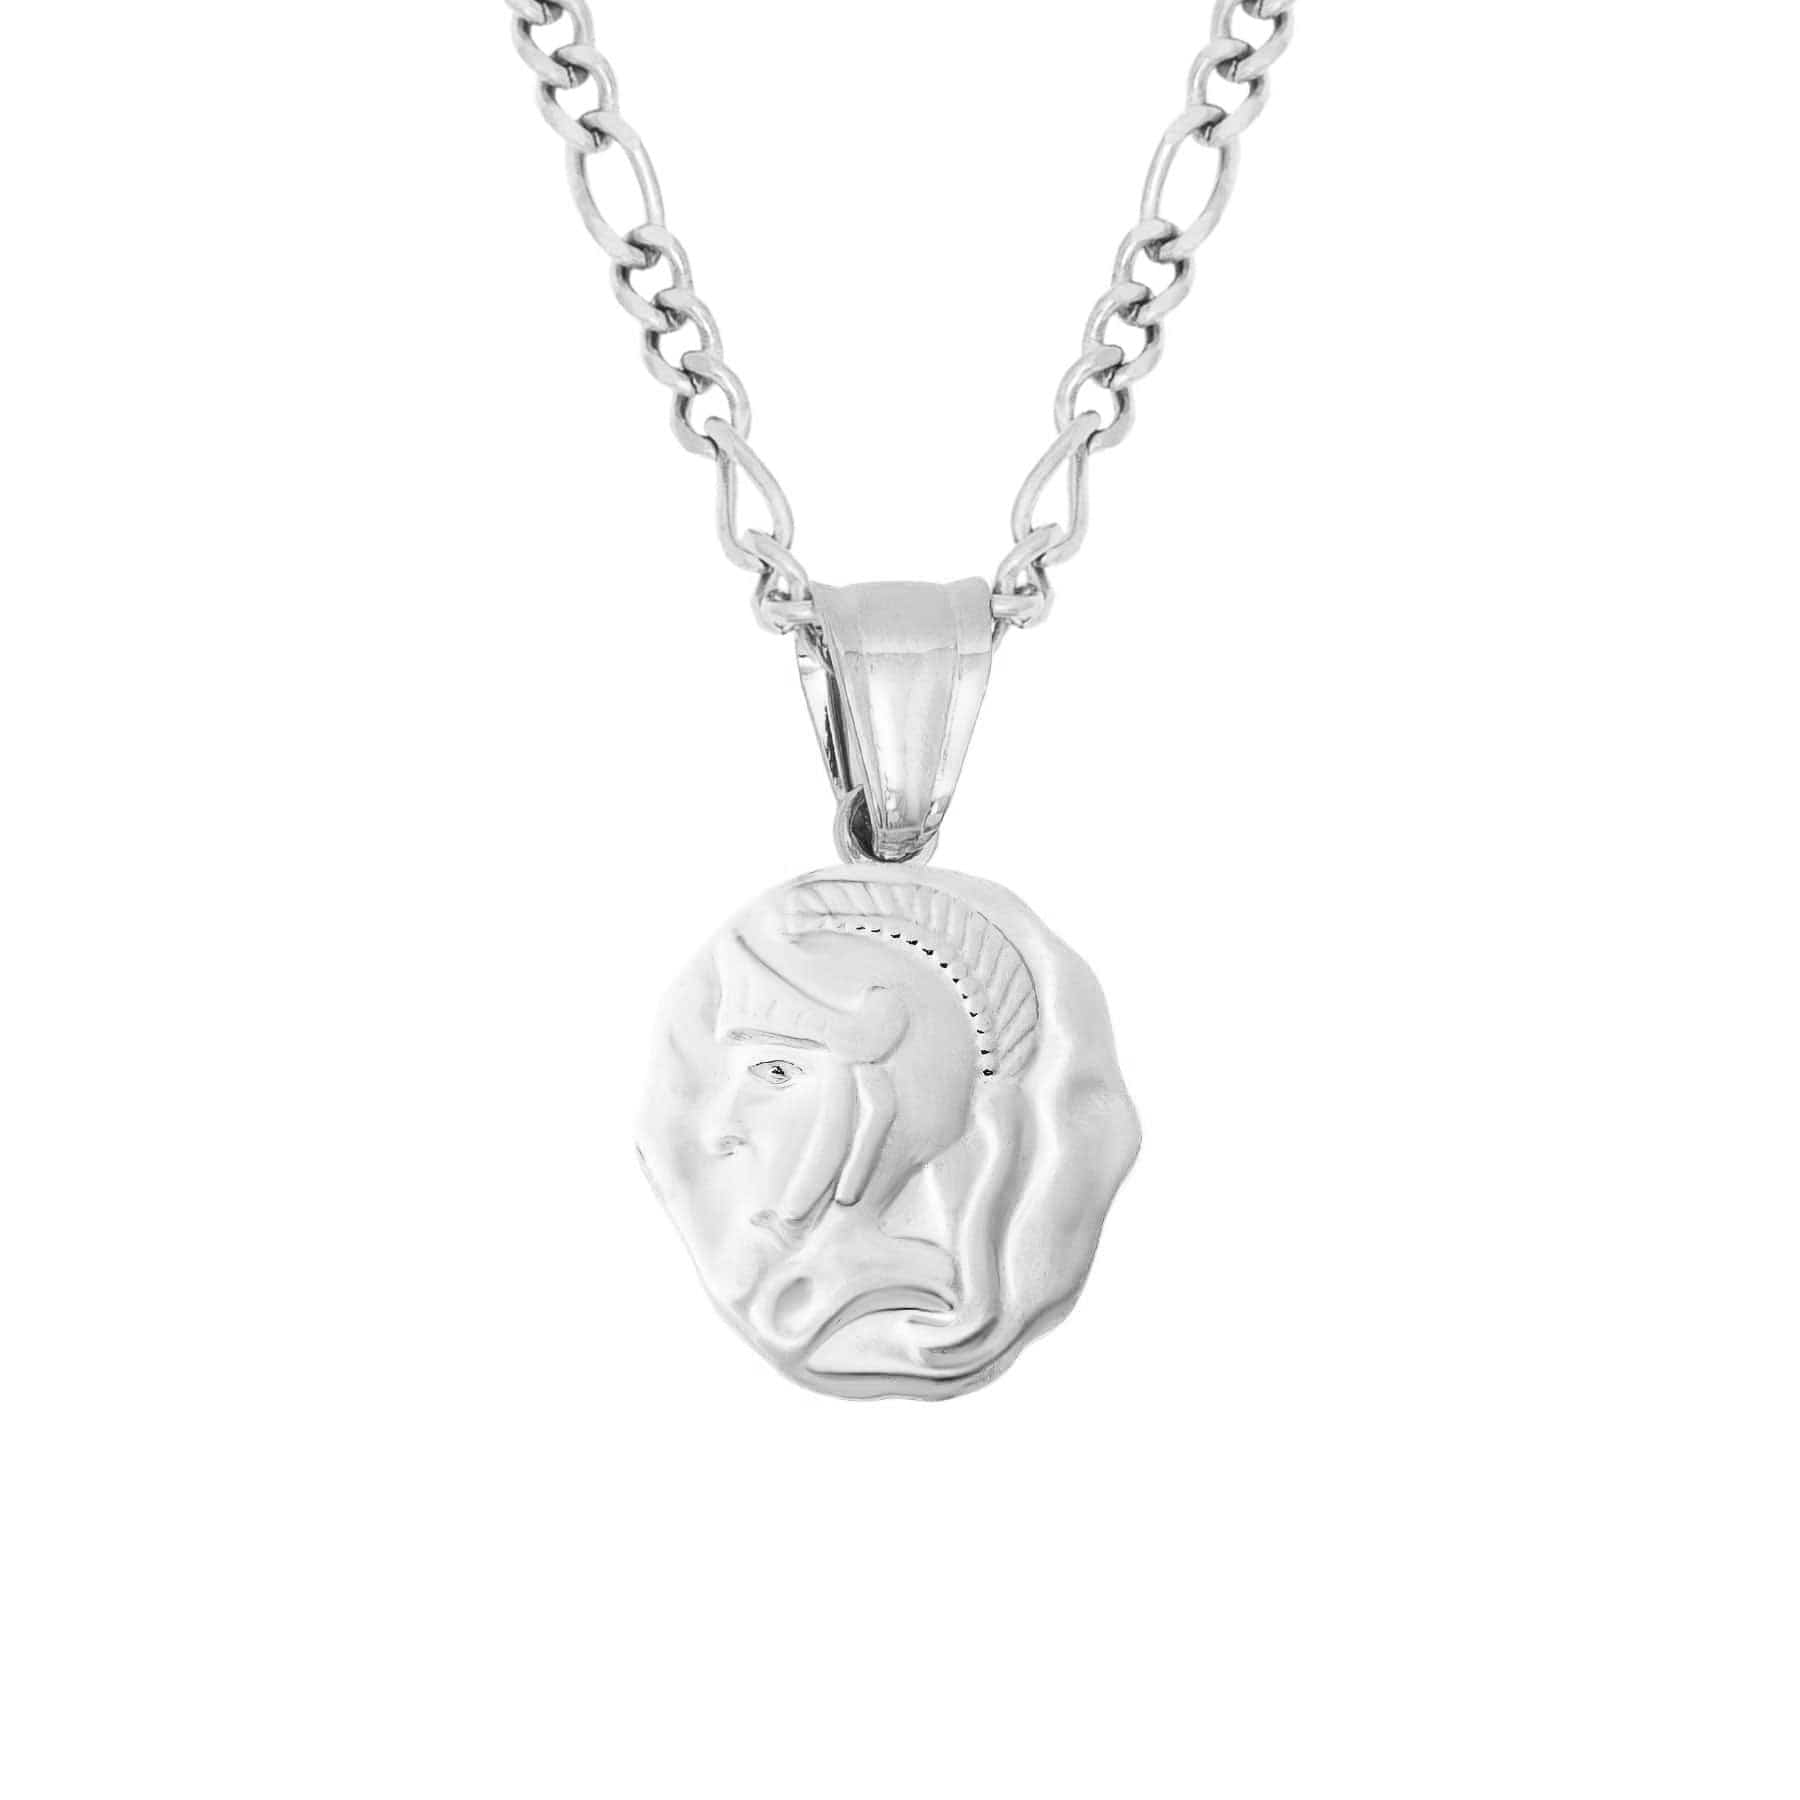 BohoMoon Stainless Steel Rome Coin Necklace Silver